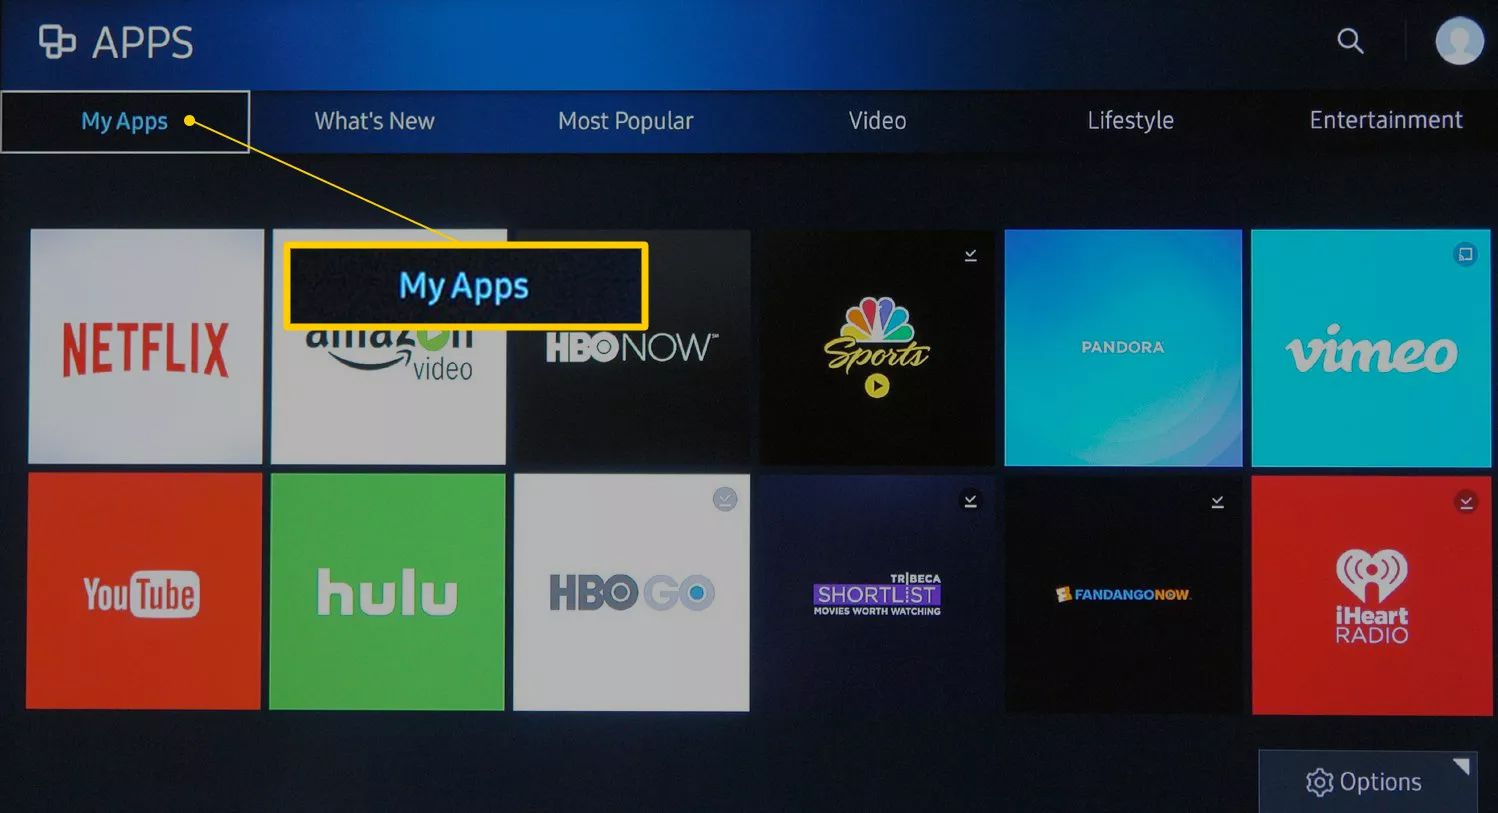 How To Download An App To My Smart TV?